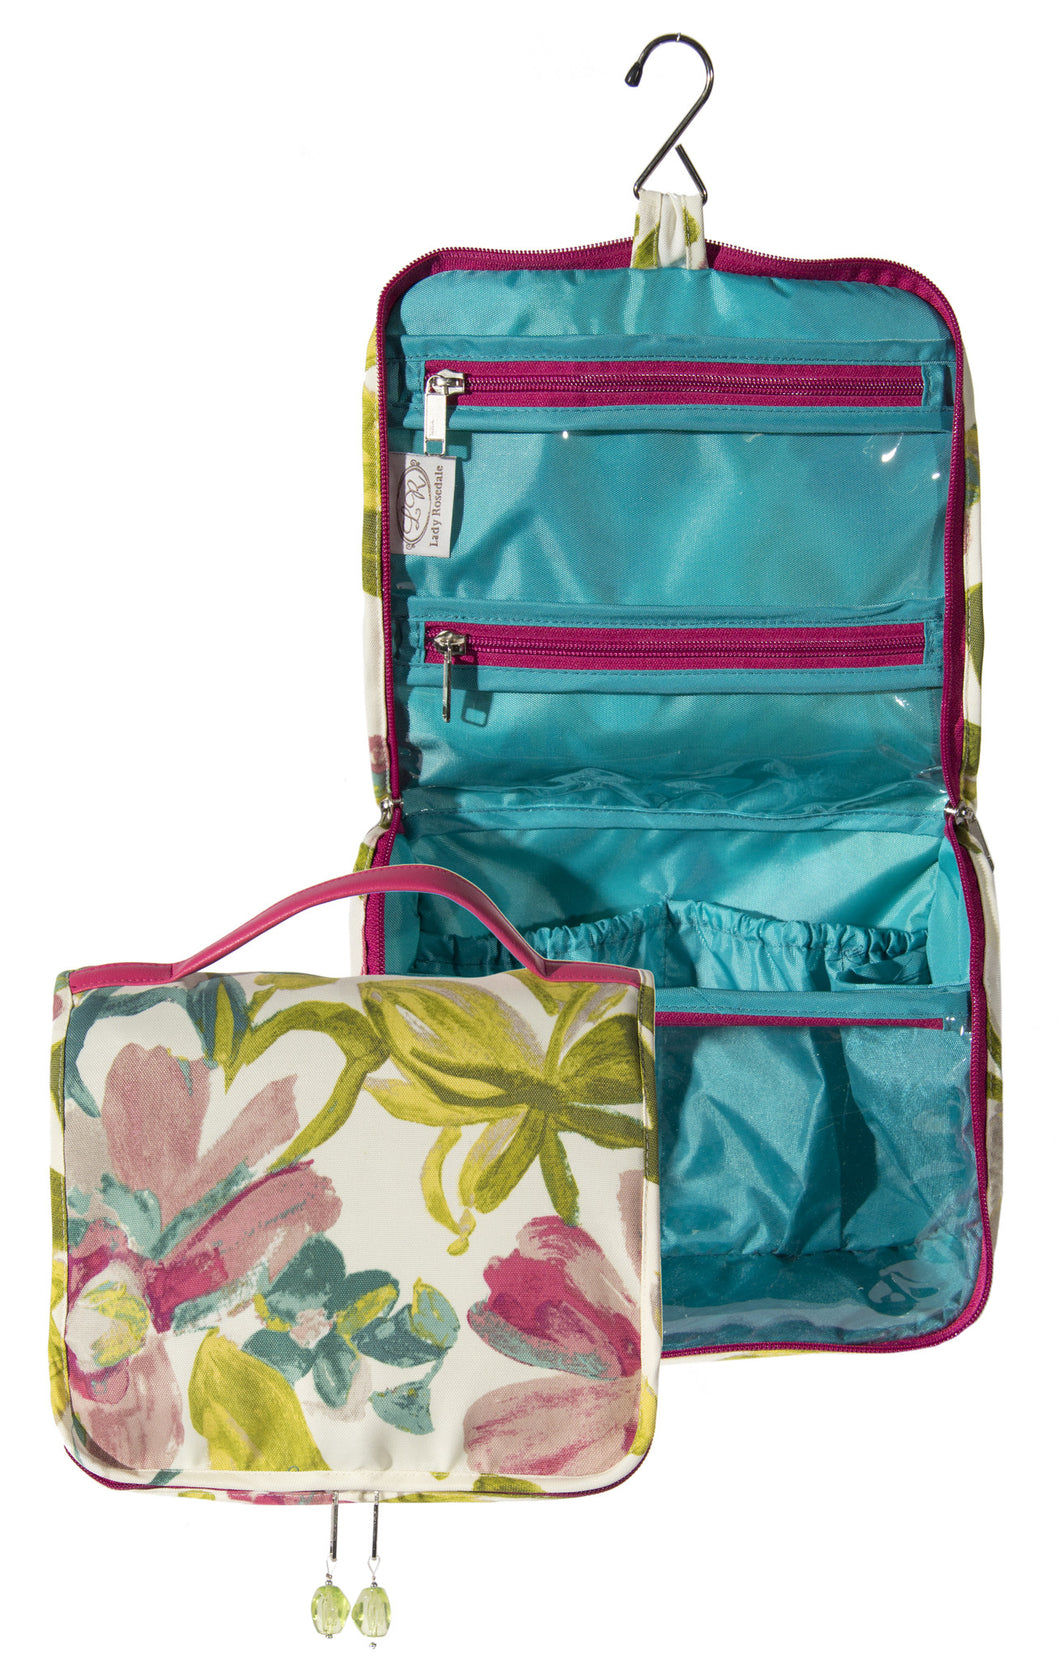 L789-3127 Ultimate Hangup White Tea, Comes with Hanger and double Zipper for easy travelling and to keep everything contained. Part of the Cosmetic and Travel Collection 10.5